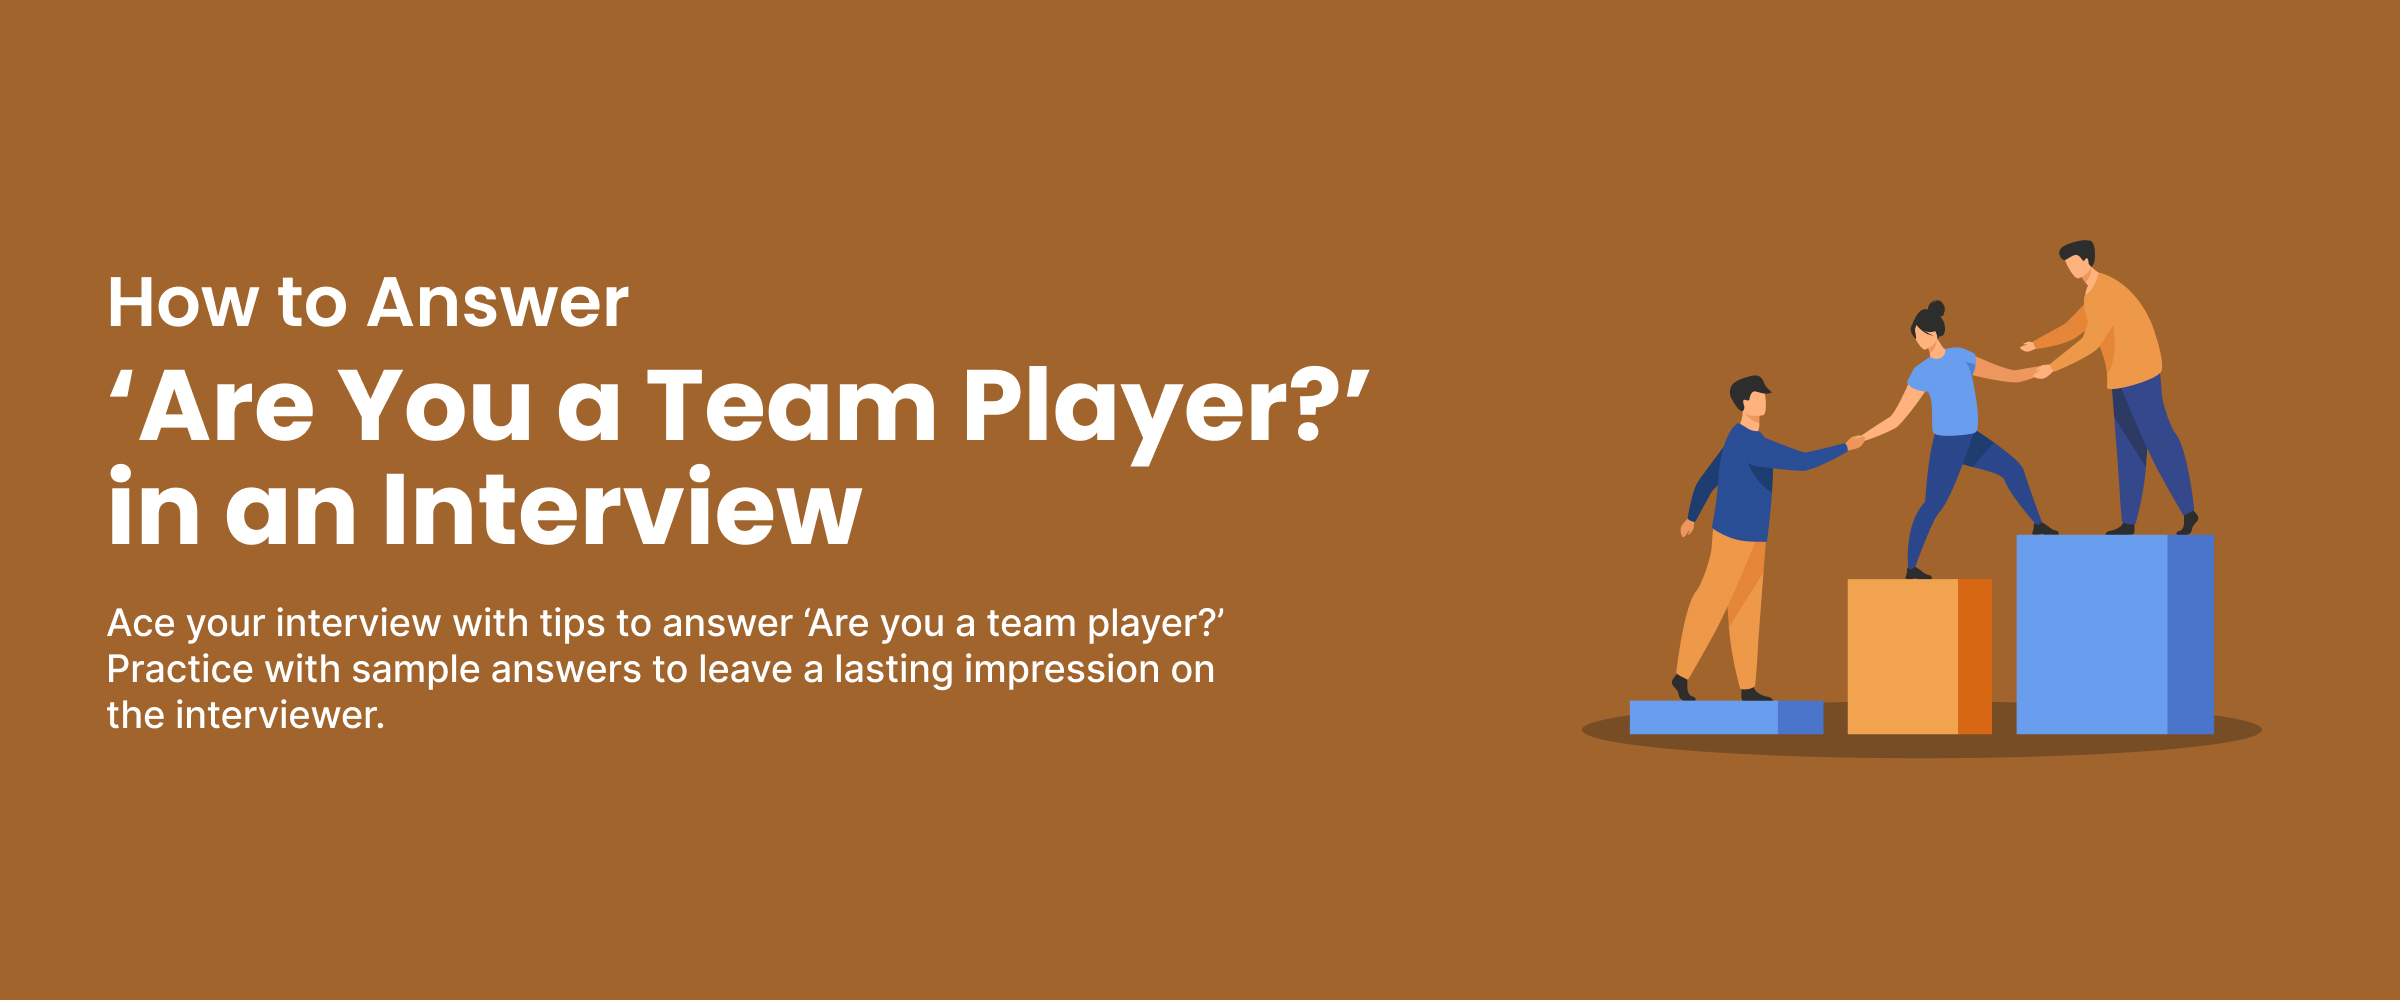 Are You a Team Player